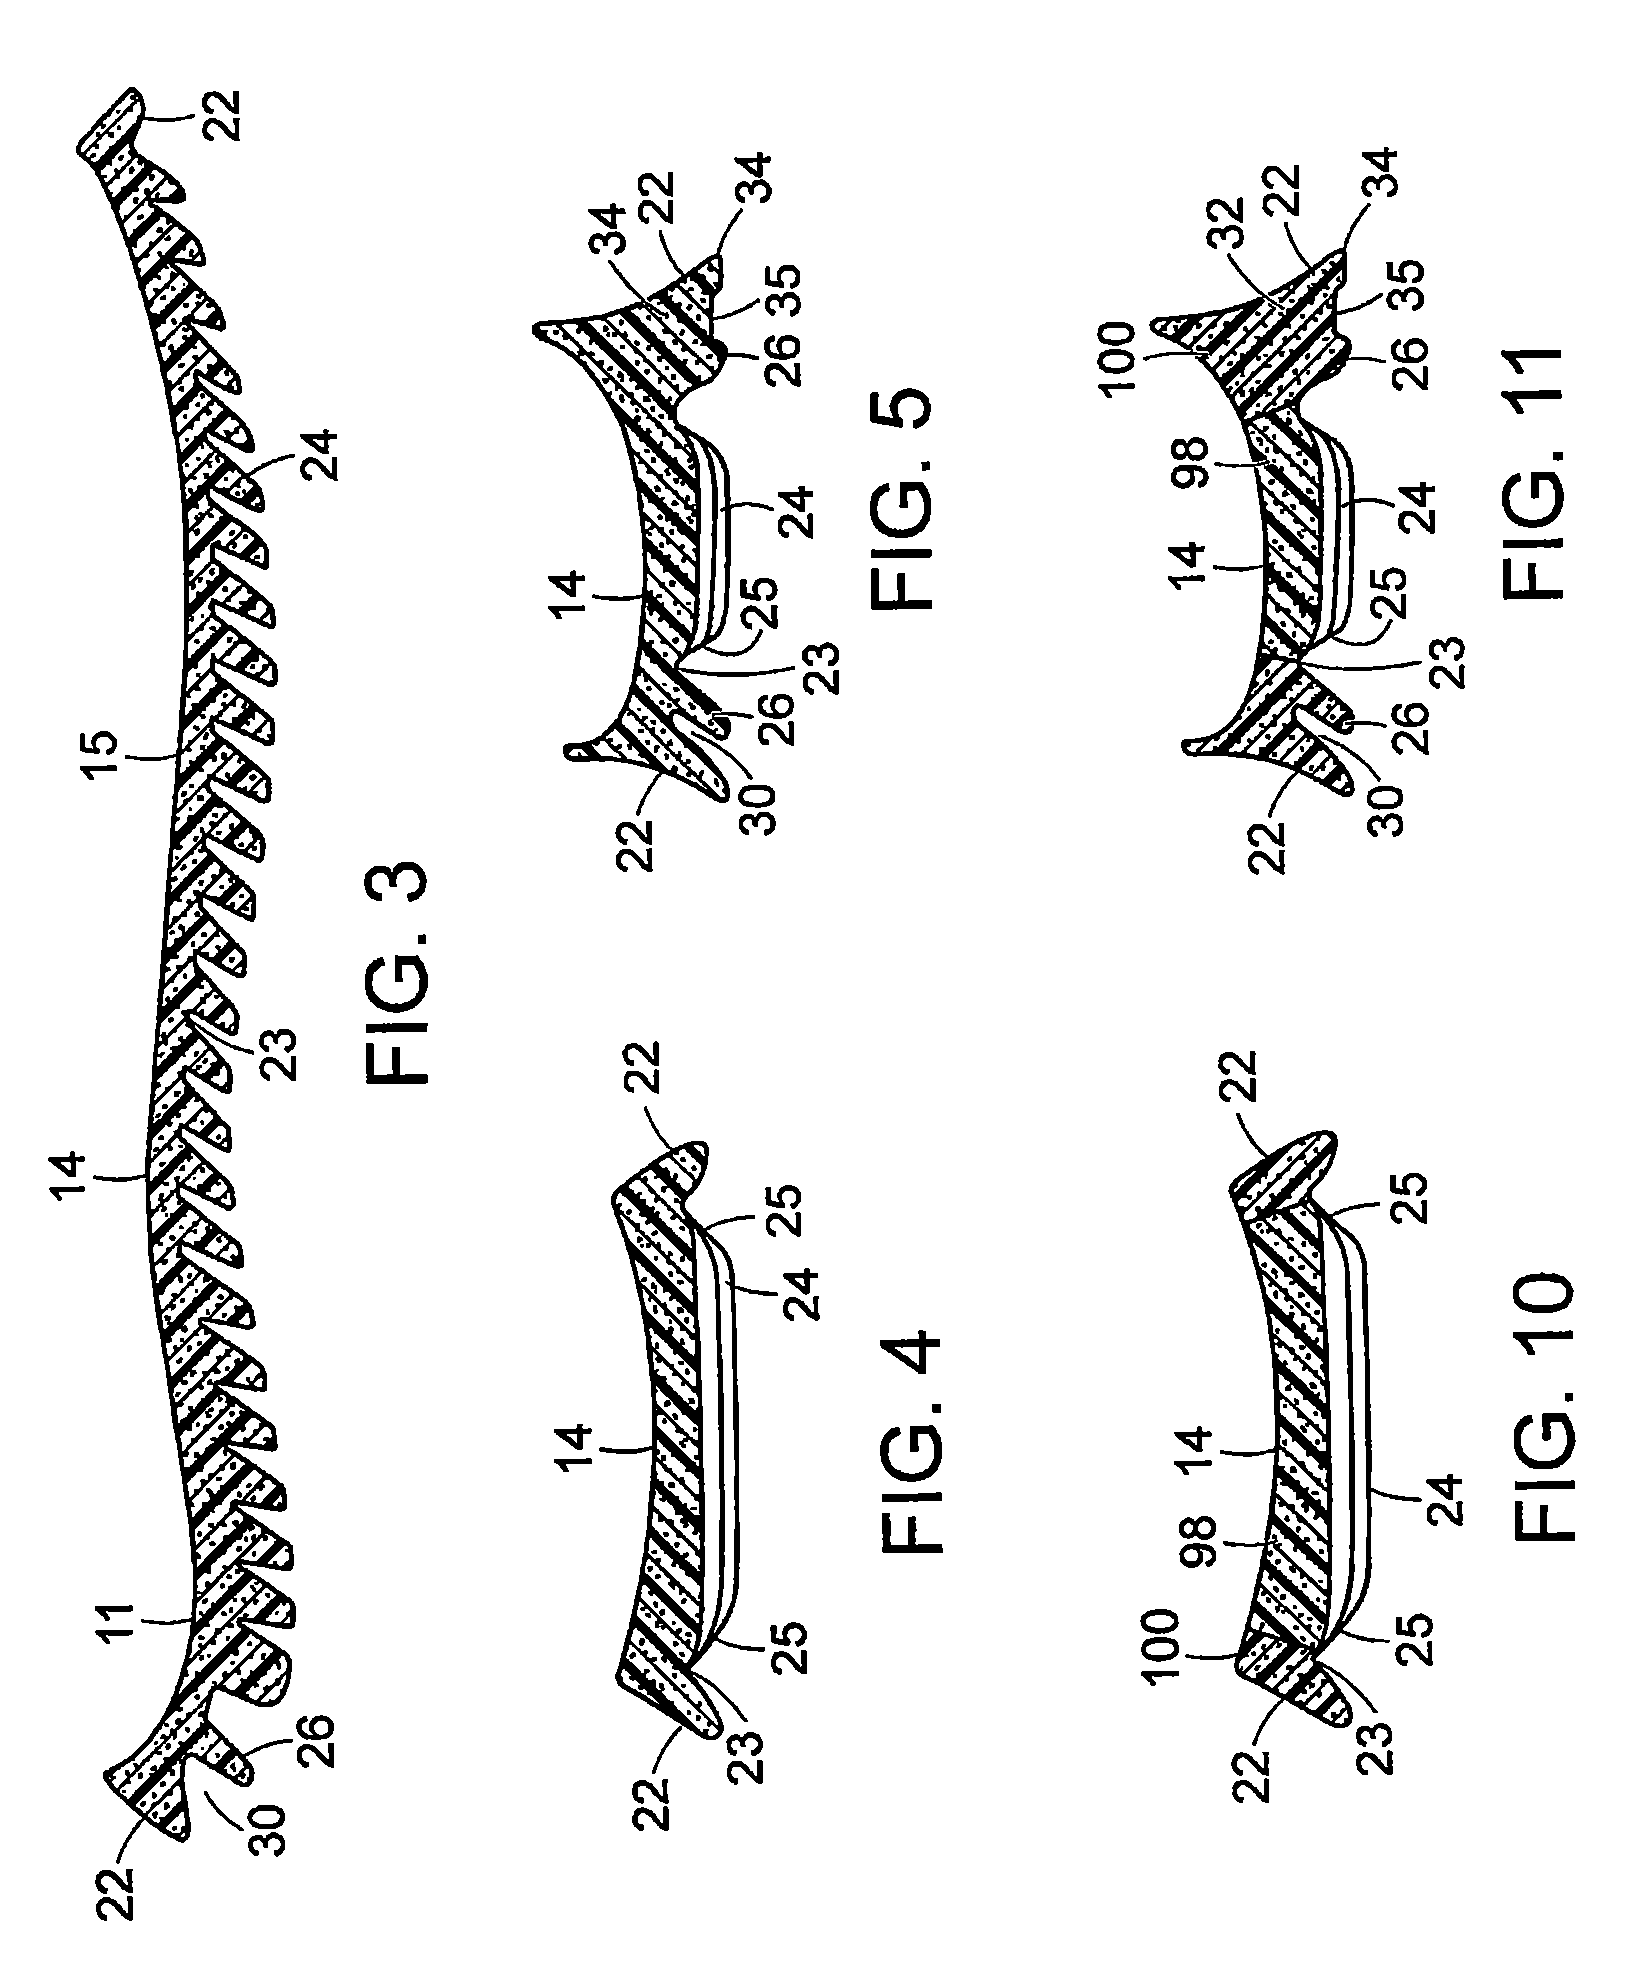 Sole for article of footwear for granular surfaces